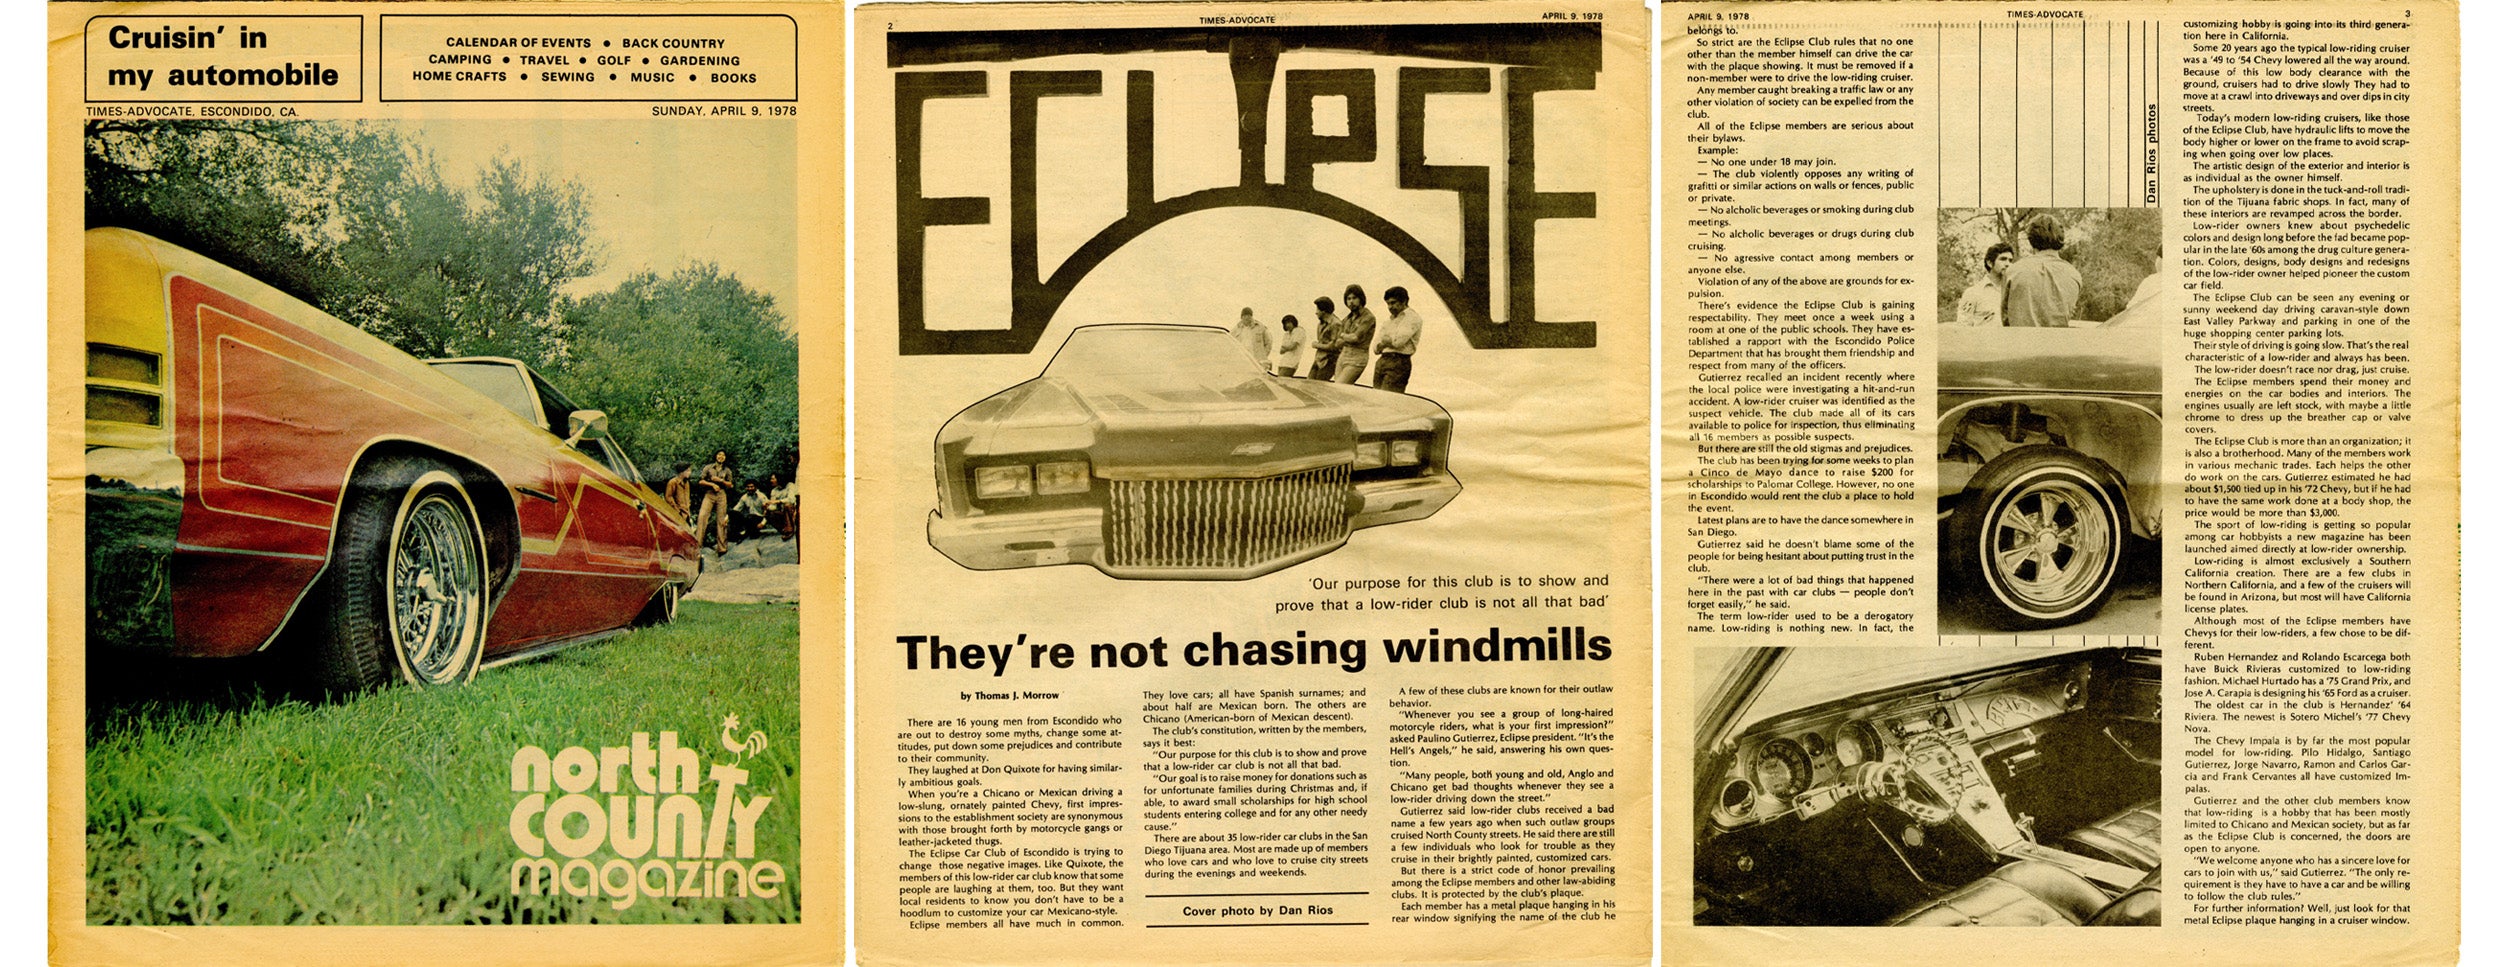 Eclipse Car Club: Newspaper article in the April 9, 1978 issue of North County magazine